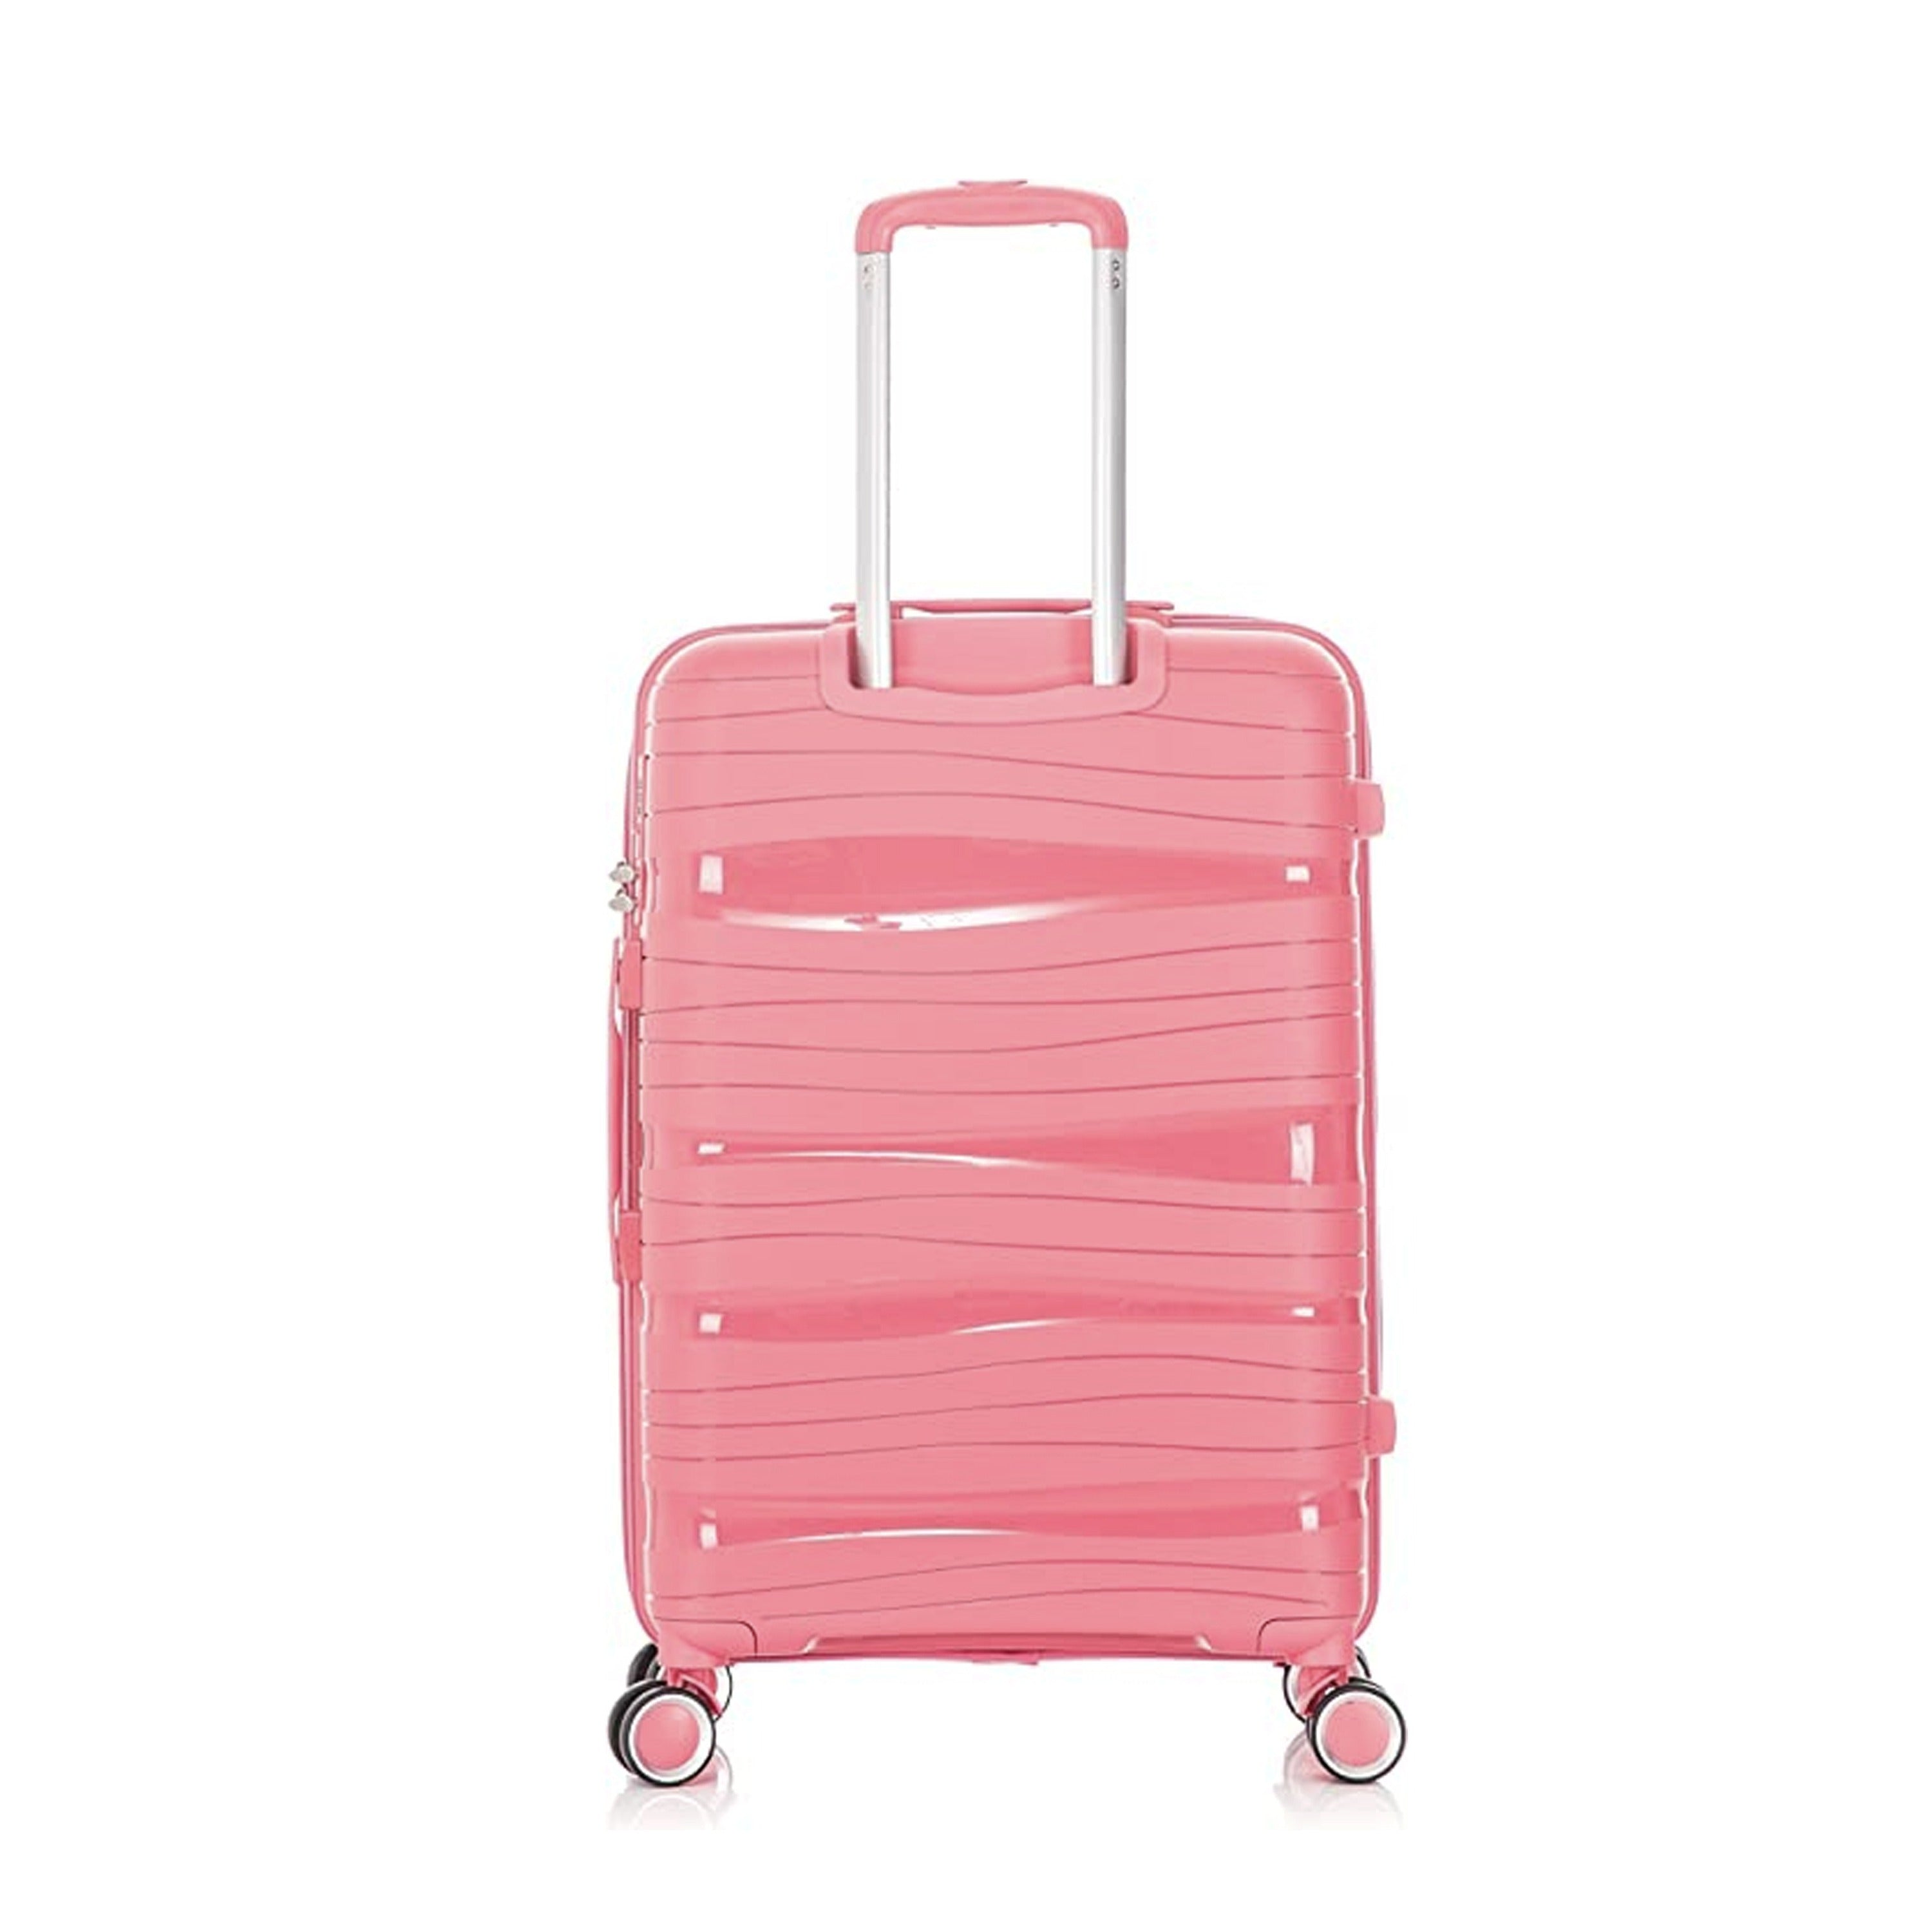 20" Light Pink Colour Royal PP Luggage Lightweight Hard Case Carry On Trolley Bag with Double Spinner Wheel